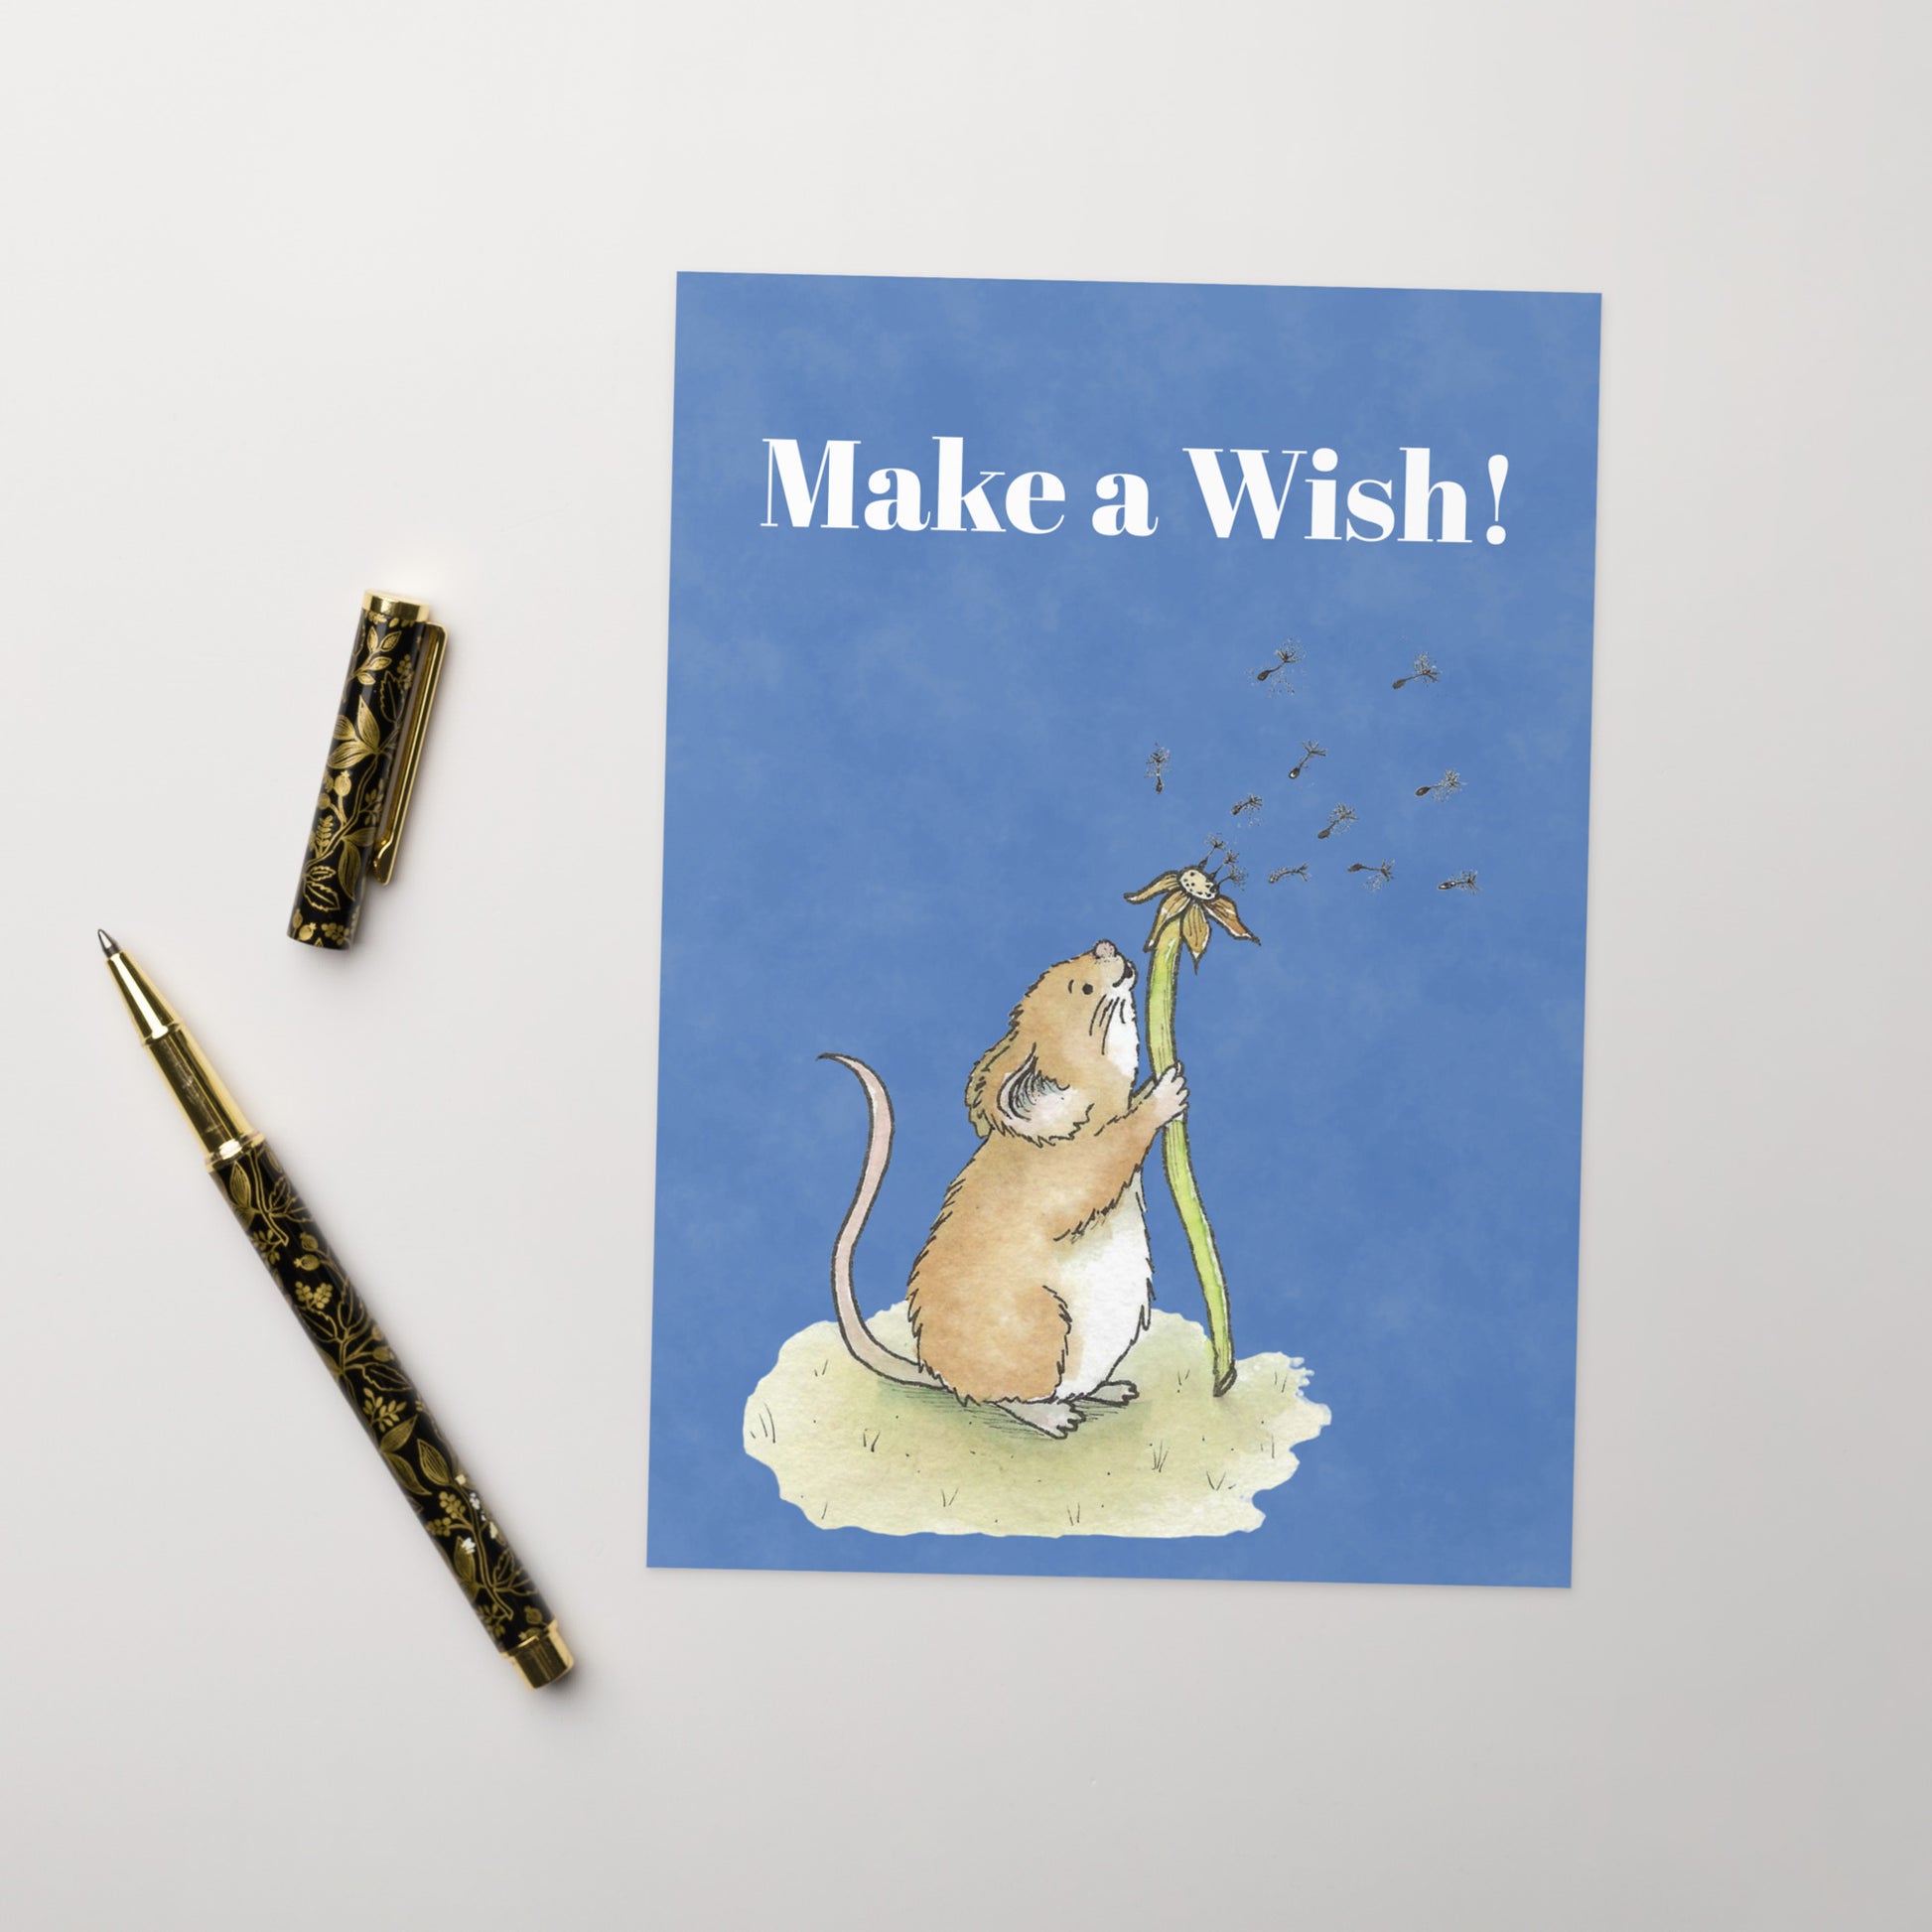 Ten fun greeting cards with ten envelopes. The front features white "Make a wish!" text and our watercolor dandelion wish mouse on a blue background. Inside is blank. Made with thick 350 gsm 150lb coated paperboard with vibrant printing.  Cards measure 5 by 7 inches. Shown on tabletop by ballpoint pen.